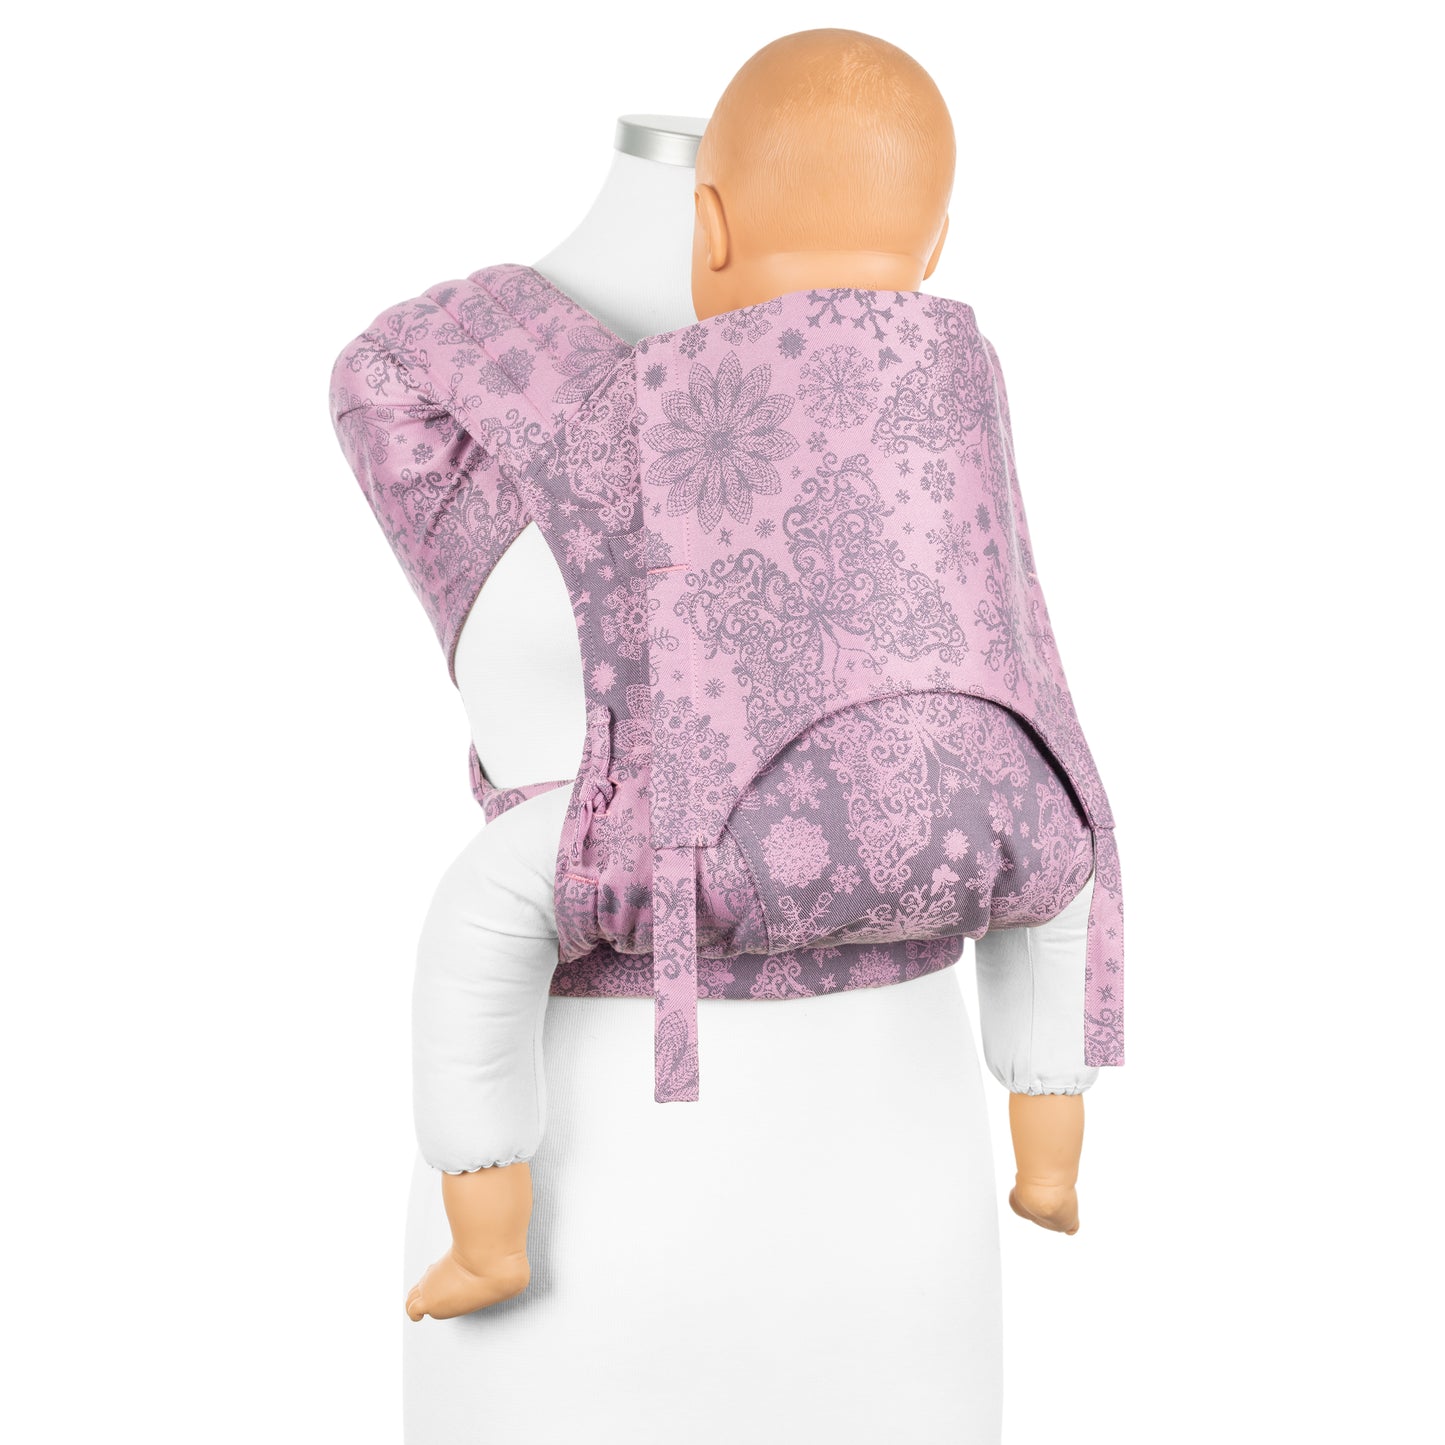 Fly Tai - Mei Tai Baby Carrier - Iced Butterfly - Violet